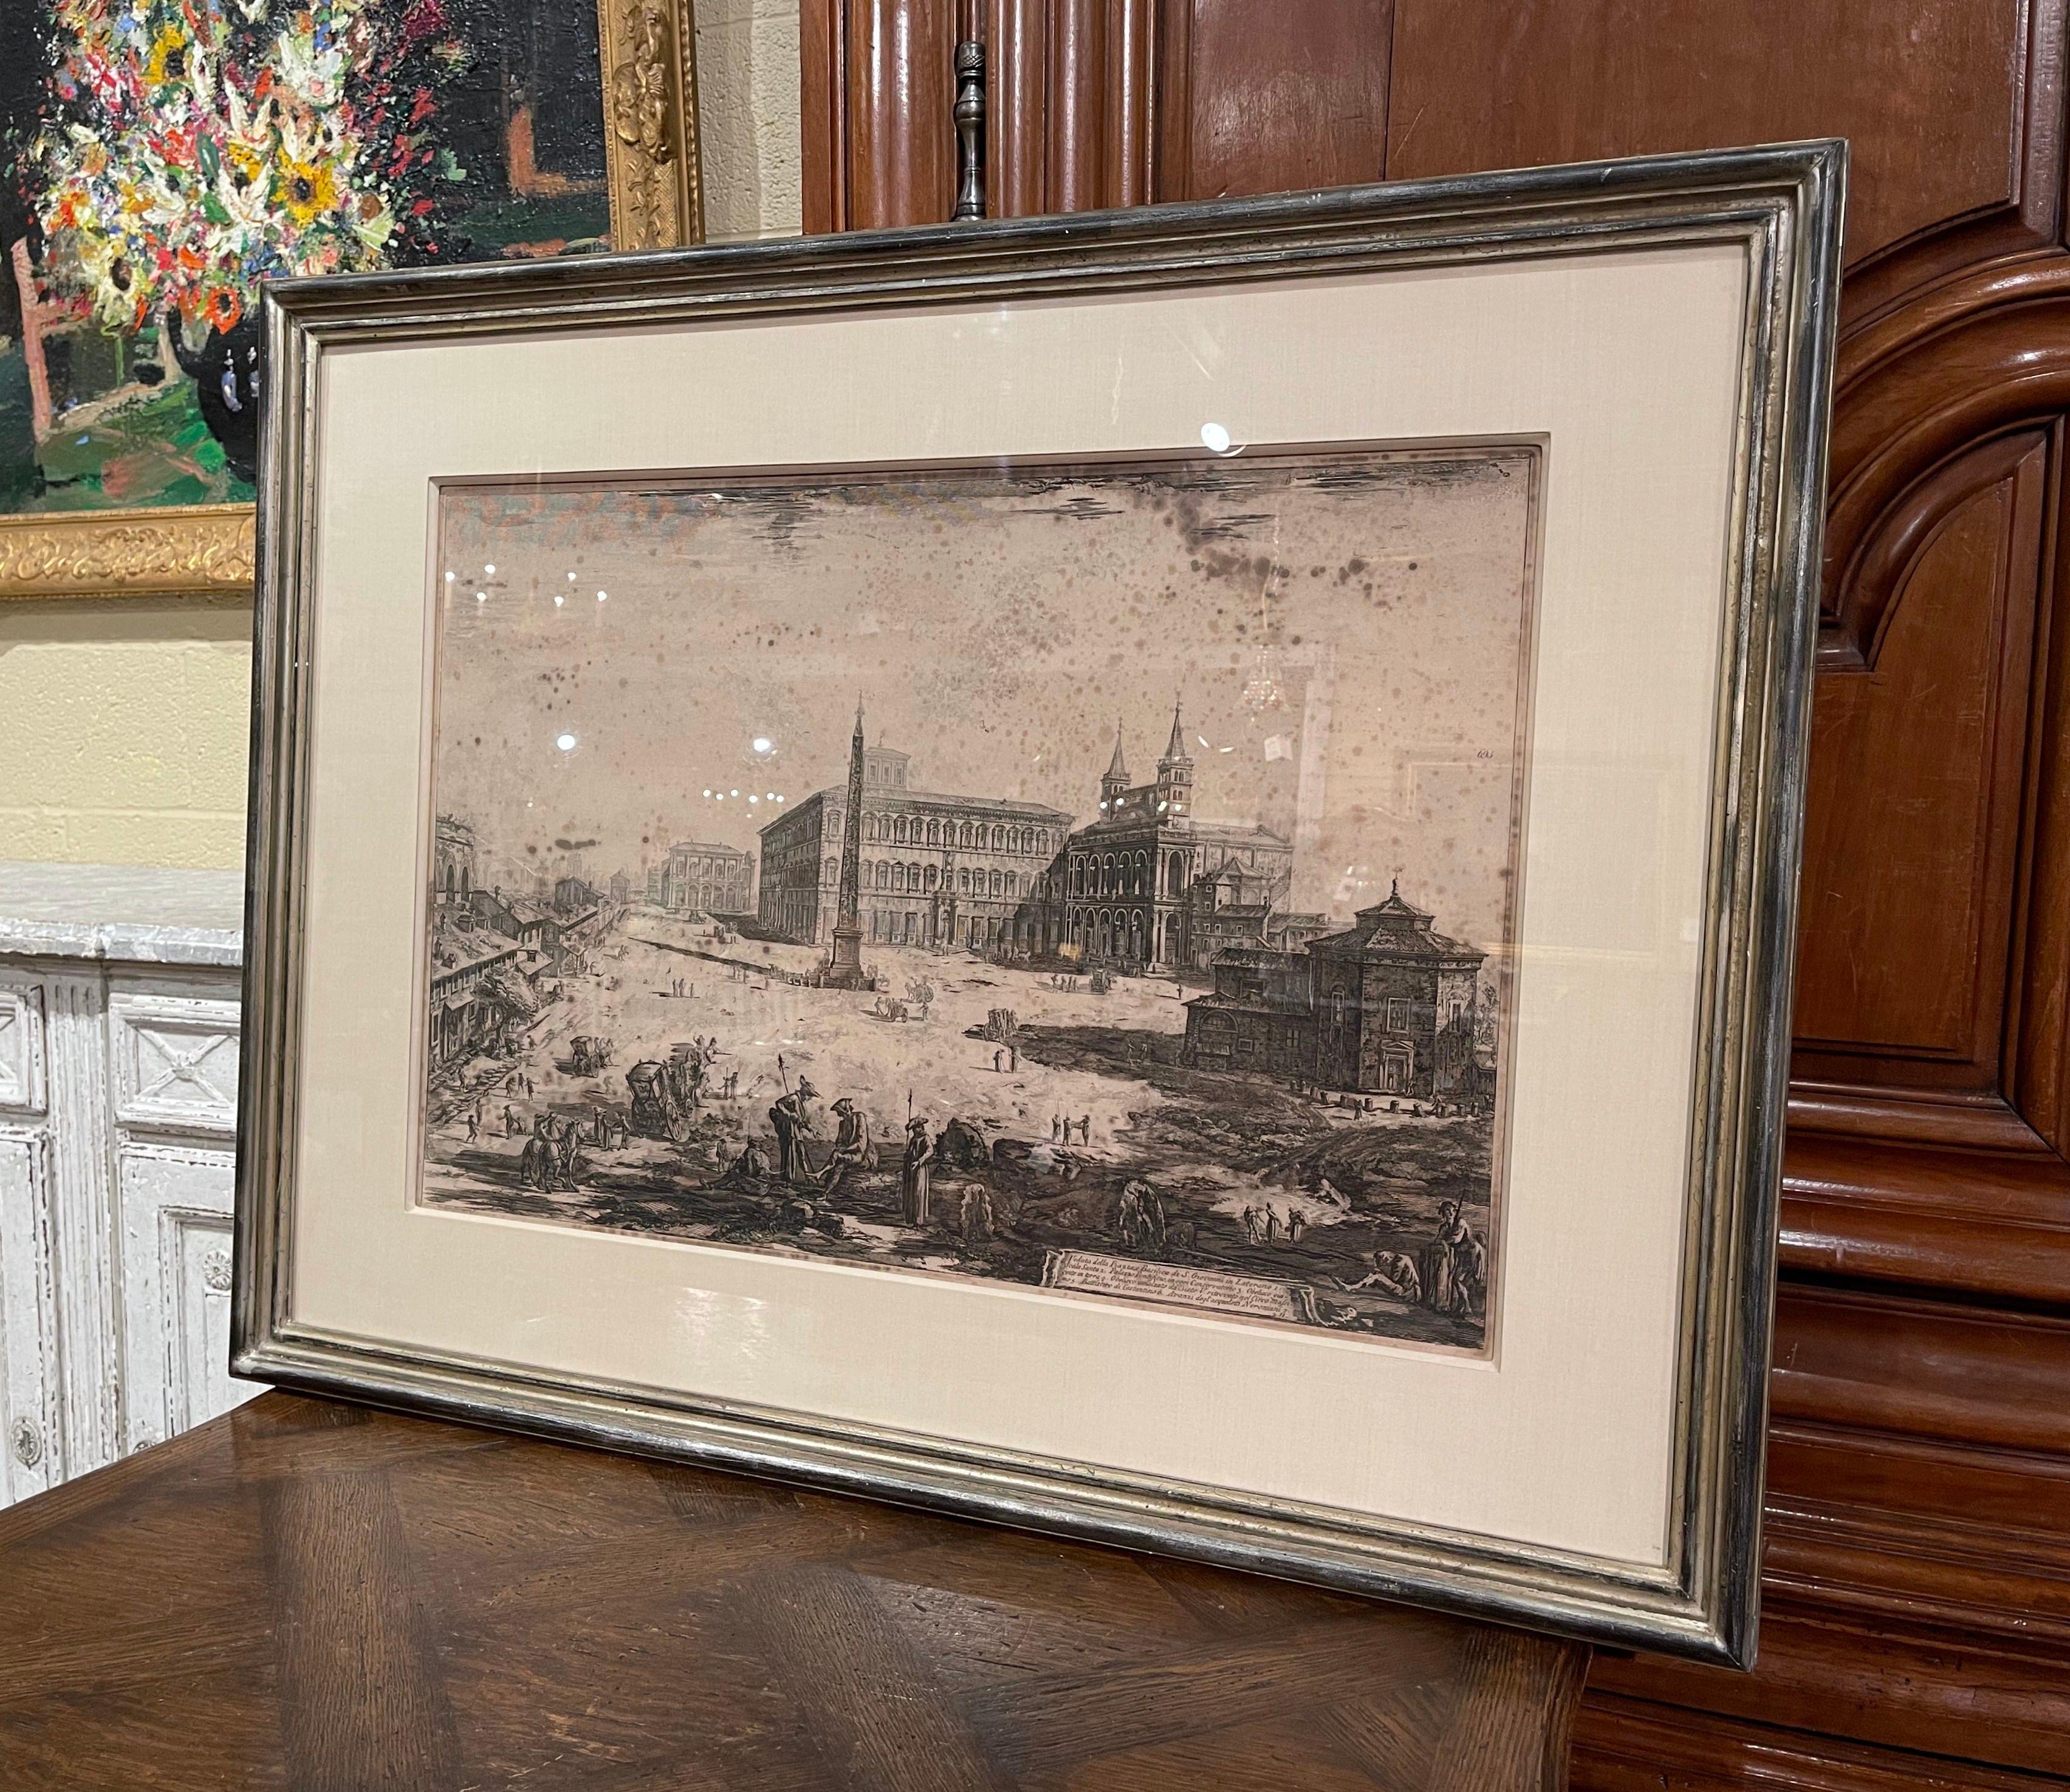 Decorate an office or study with this antique black and white engraving. Hand colored in Italy circa 1775, the large monochromatic etching is set in a silvered frame with protective glass, and depicts the Arch basilica of Saint John in Rome. The